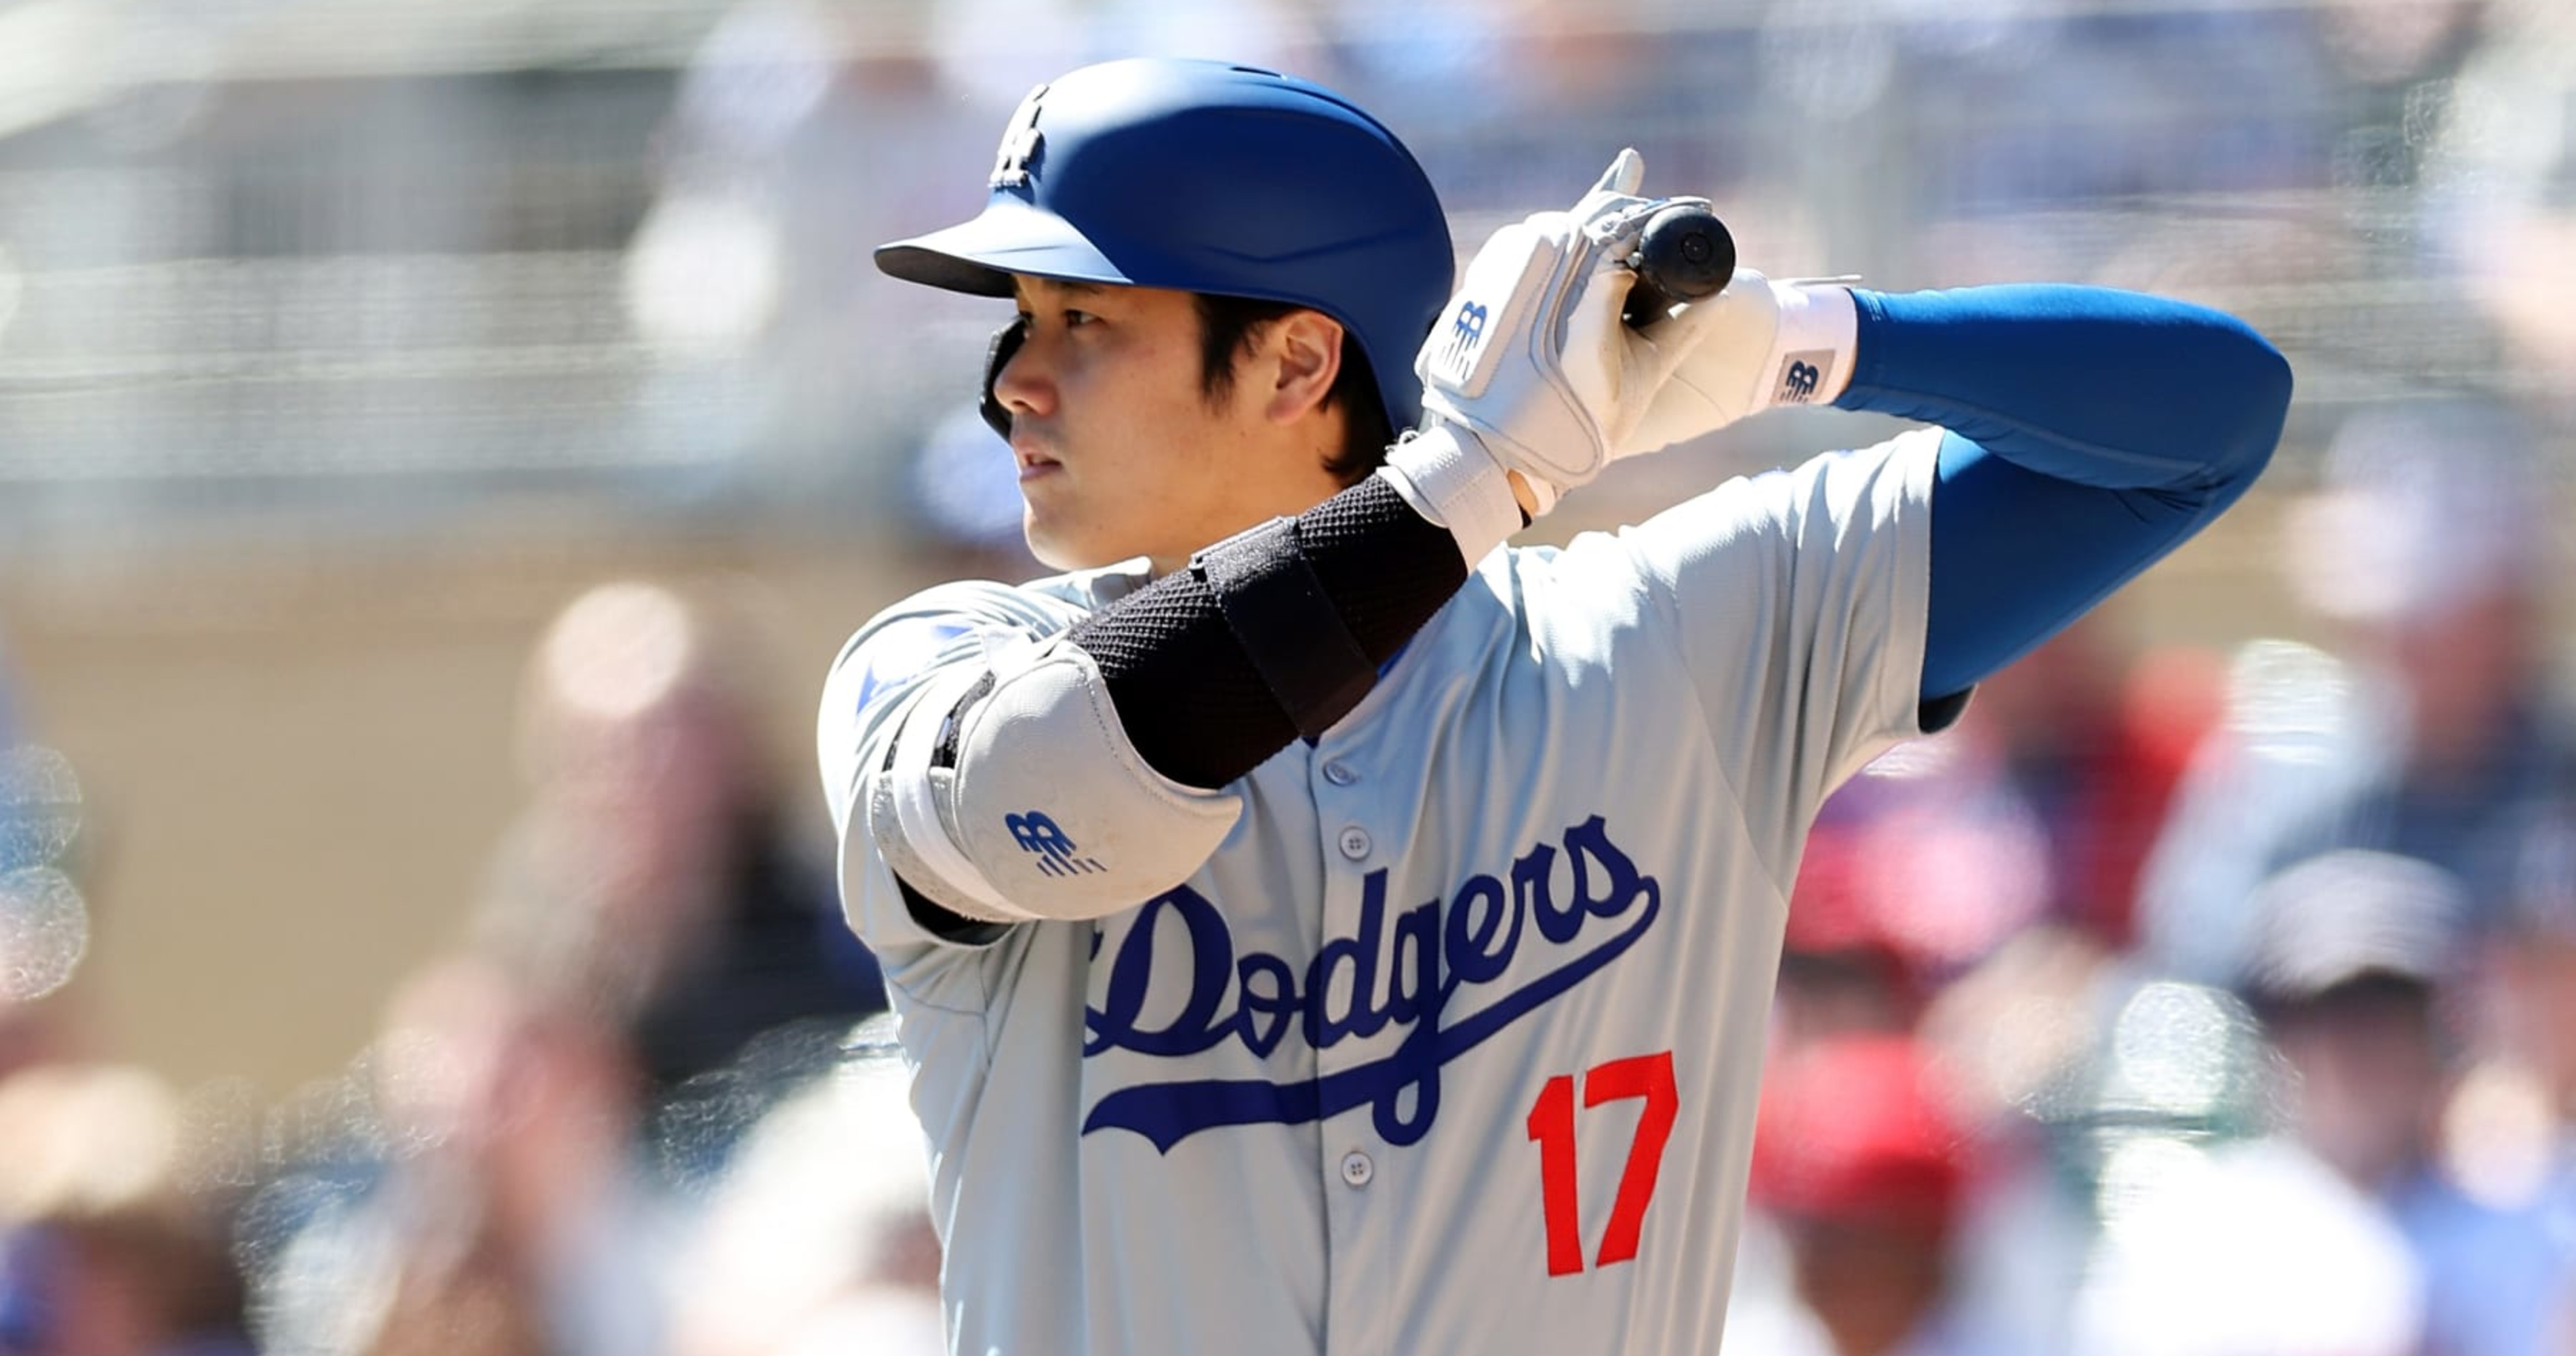 MLB to Decide on Shohei Ohtani Investigation After Resolution of Ippei Mizuhara Case